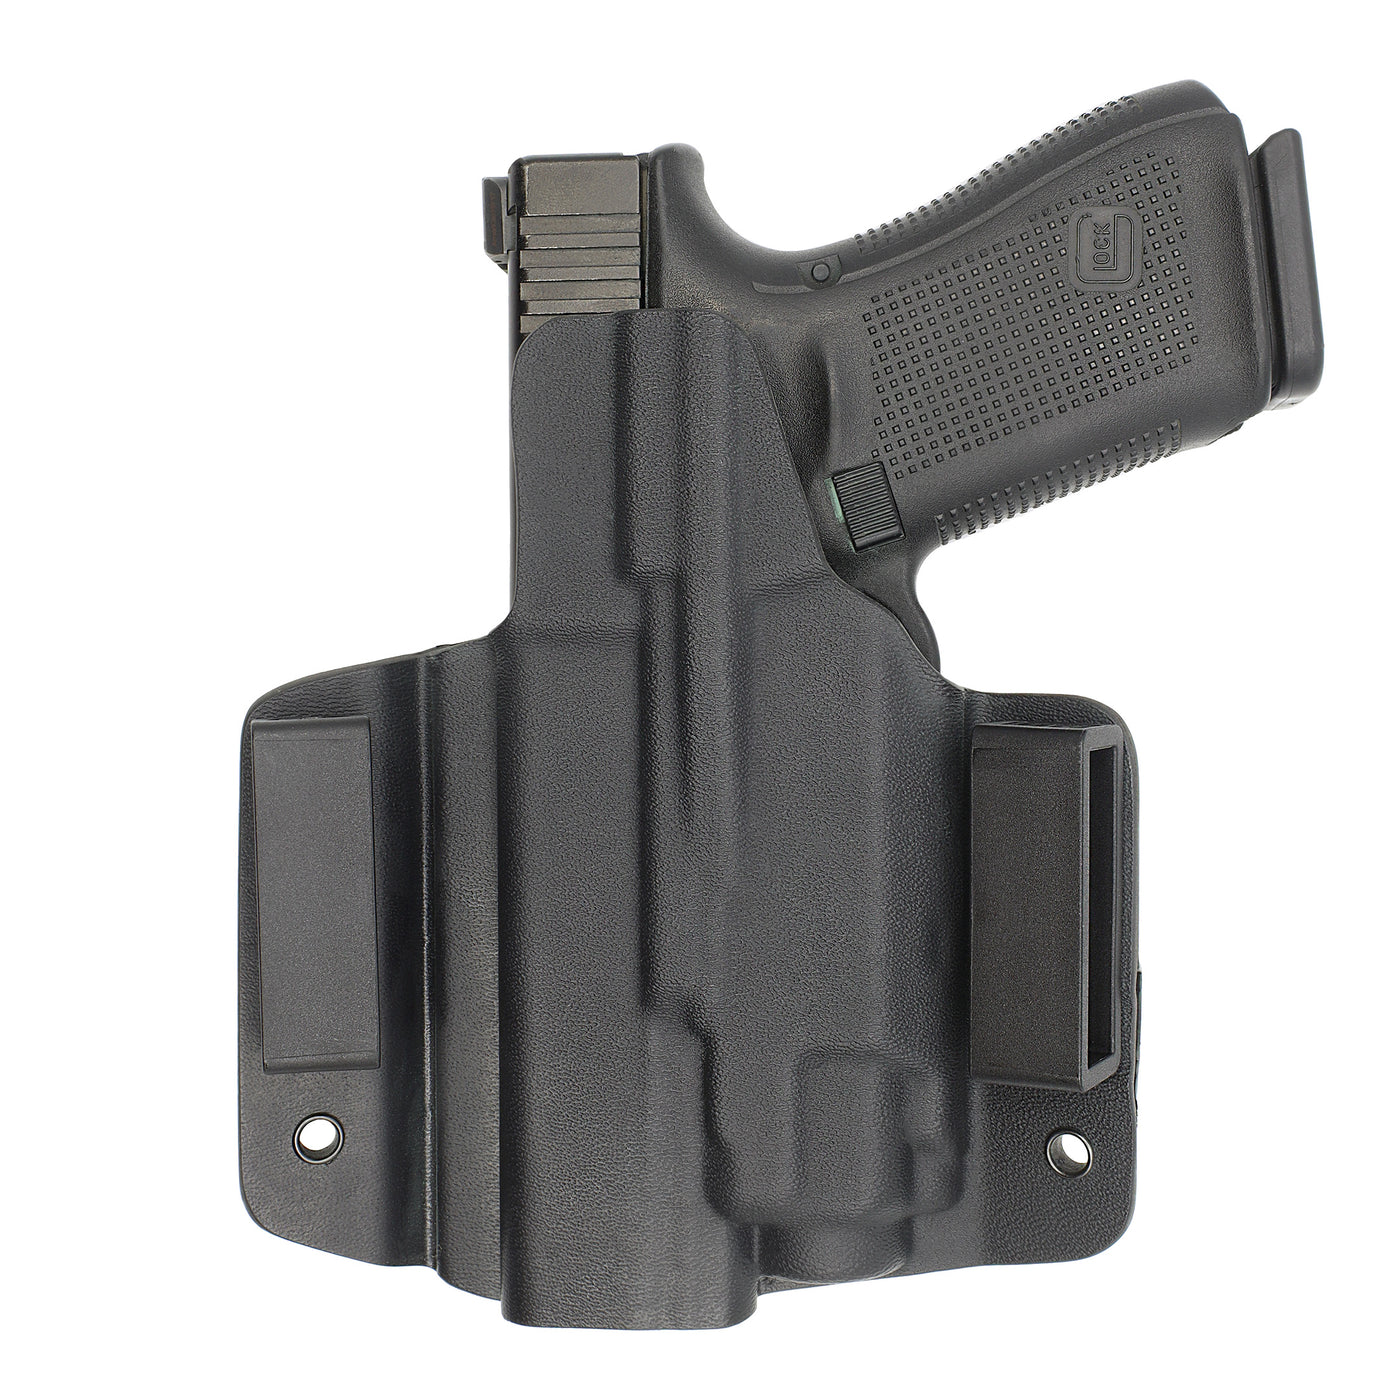 C&G Holsters custom OWB Tactical Poly80 streamlight TLR8 holstered back view